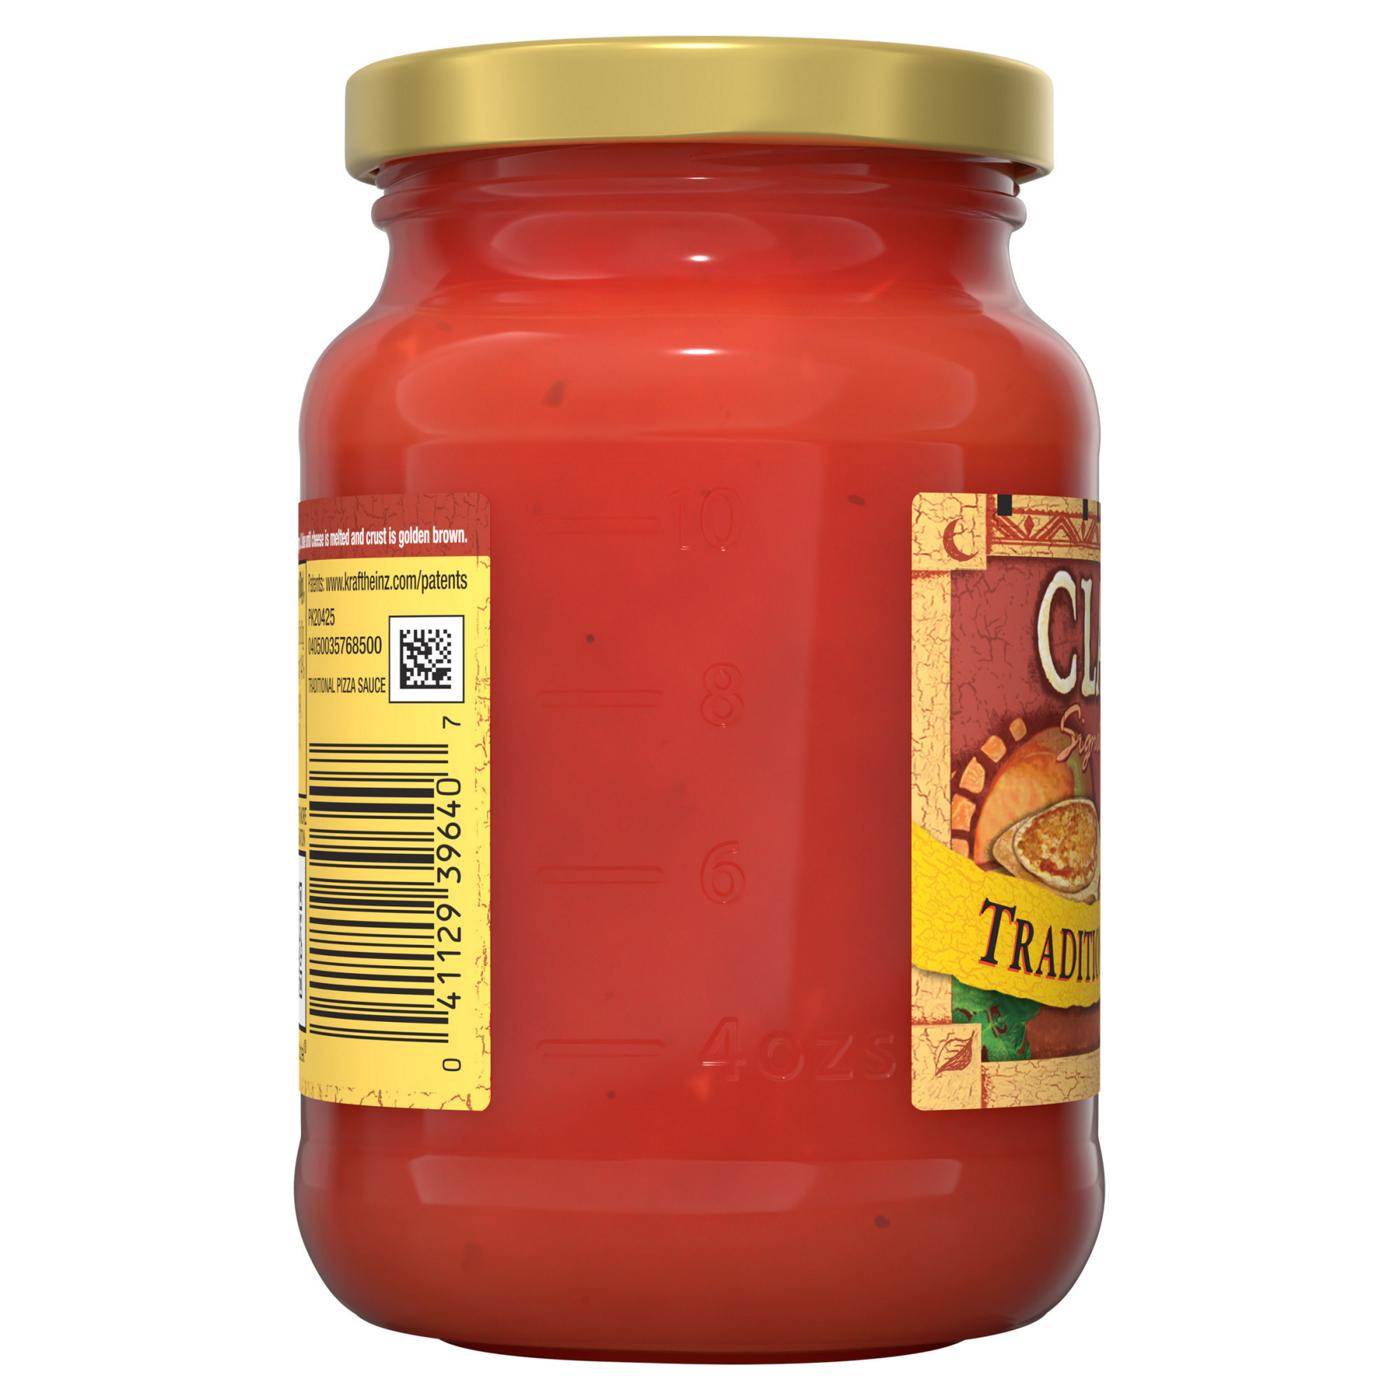 Classico Traditional Pizza Sauce; image 7 of 9